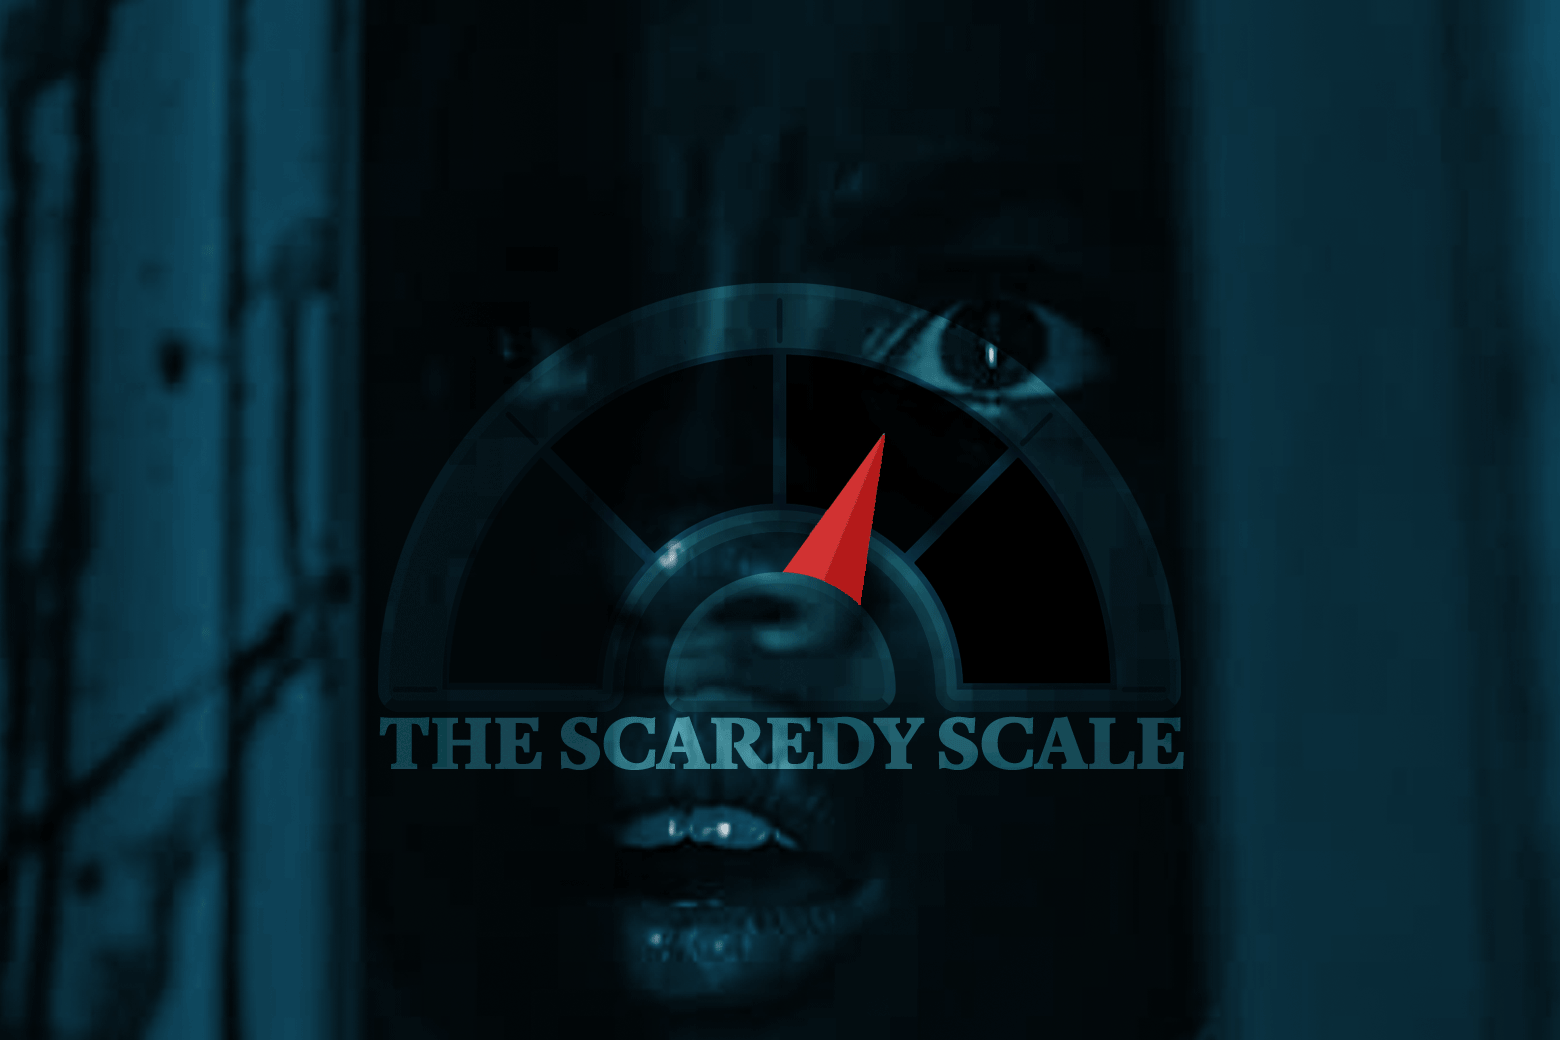 The Scaredy Scale logo is laid over a still from Candyman.